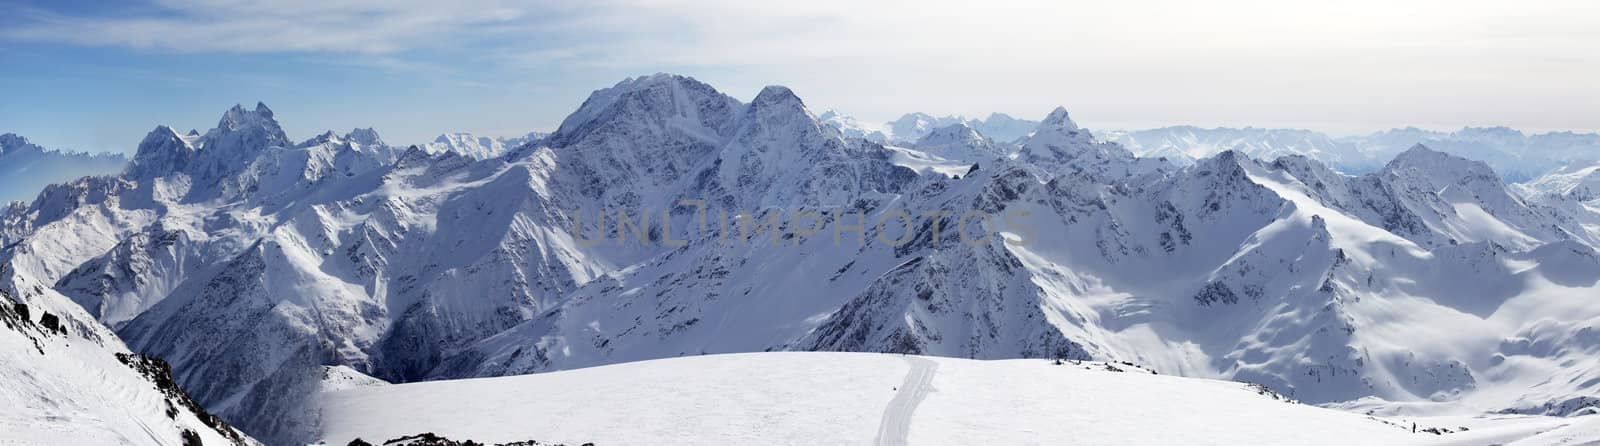 Russia. Caucasus. View on Elbrus Mount - the highest point of Europe from Cheget Mount. Panorama the review from 6 shots